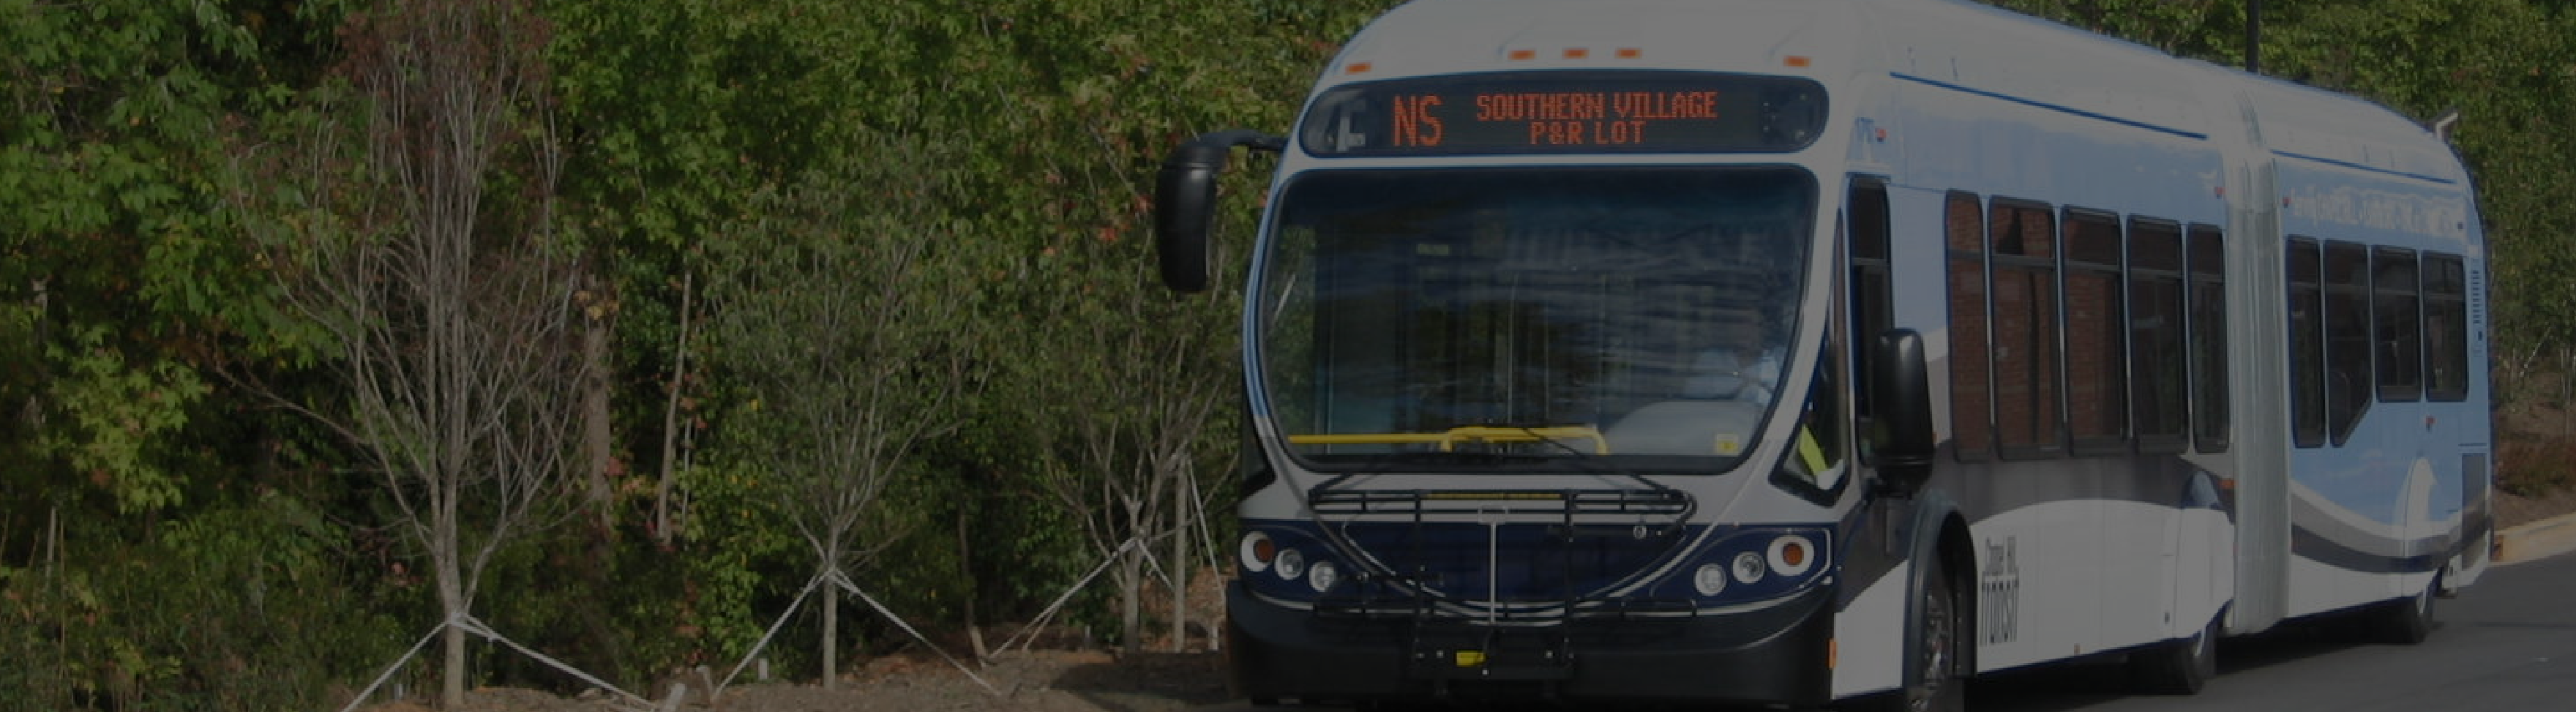 An articulated Chapel Hill Transit bus parked on the side of the road.